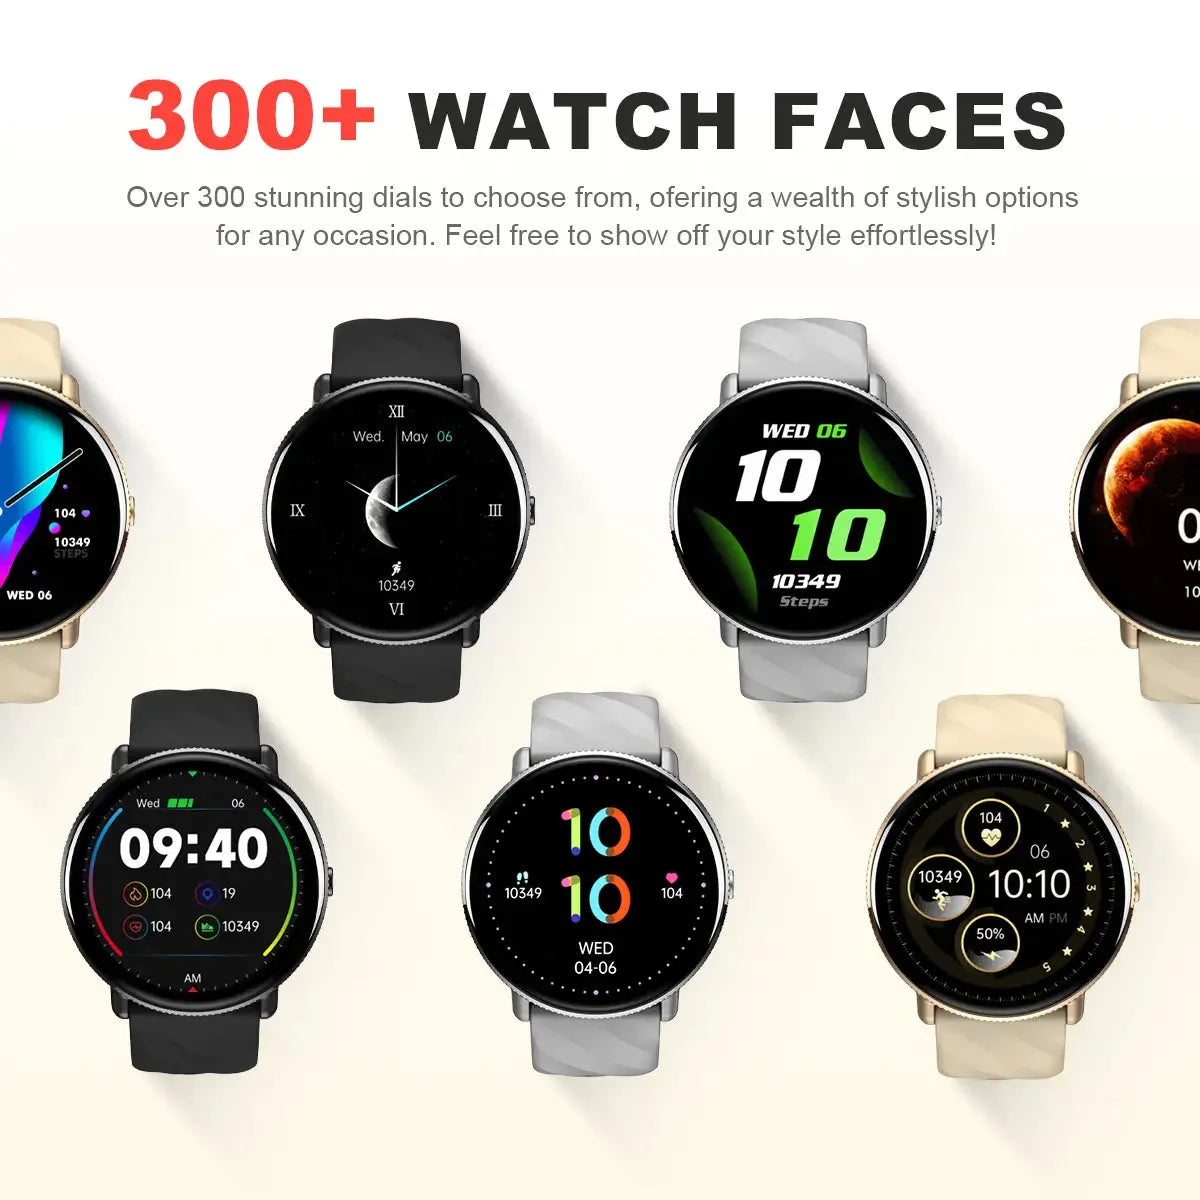 Tousains smartwatch P2 with 300+ watch faces